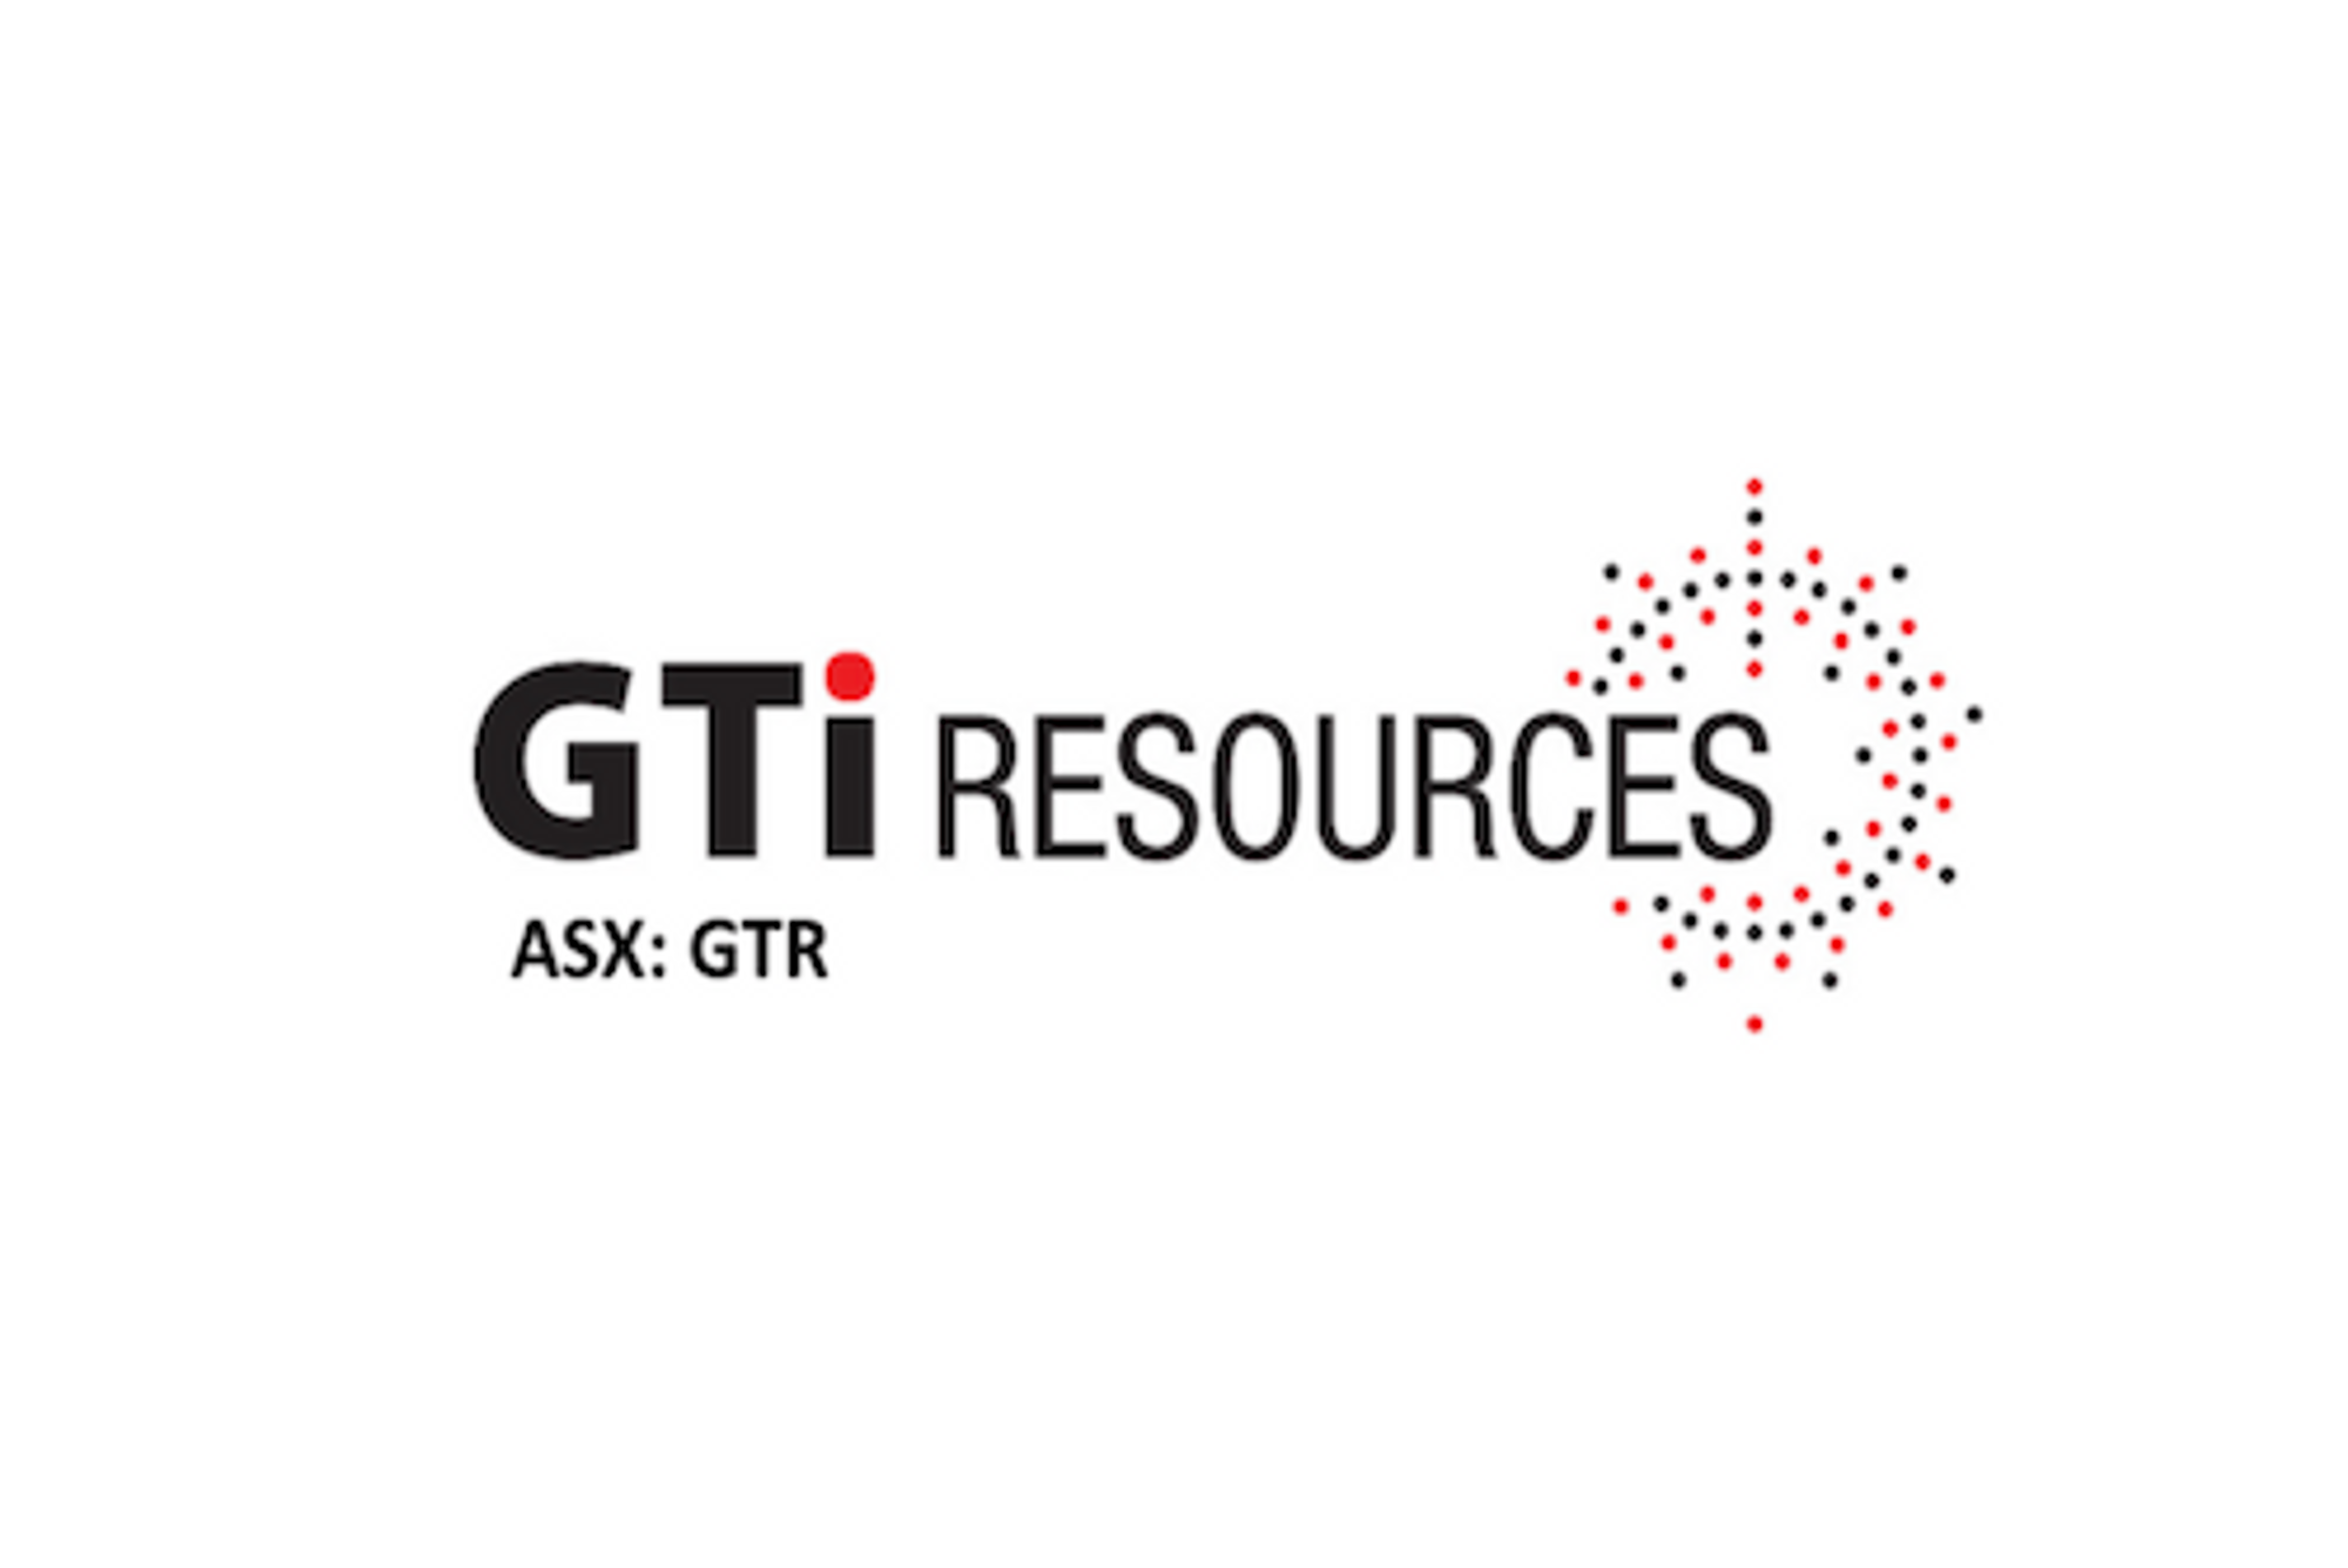 GTI Resources